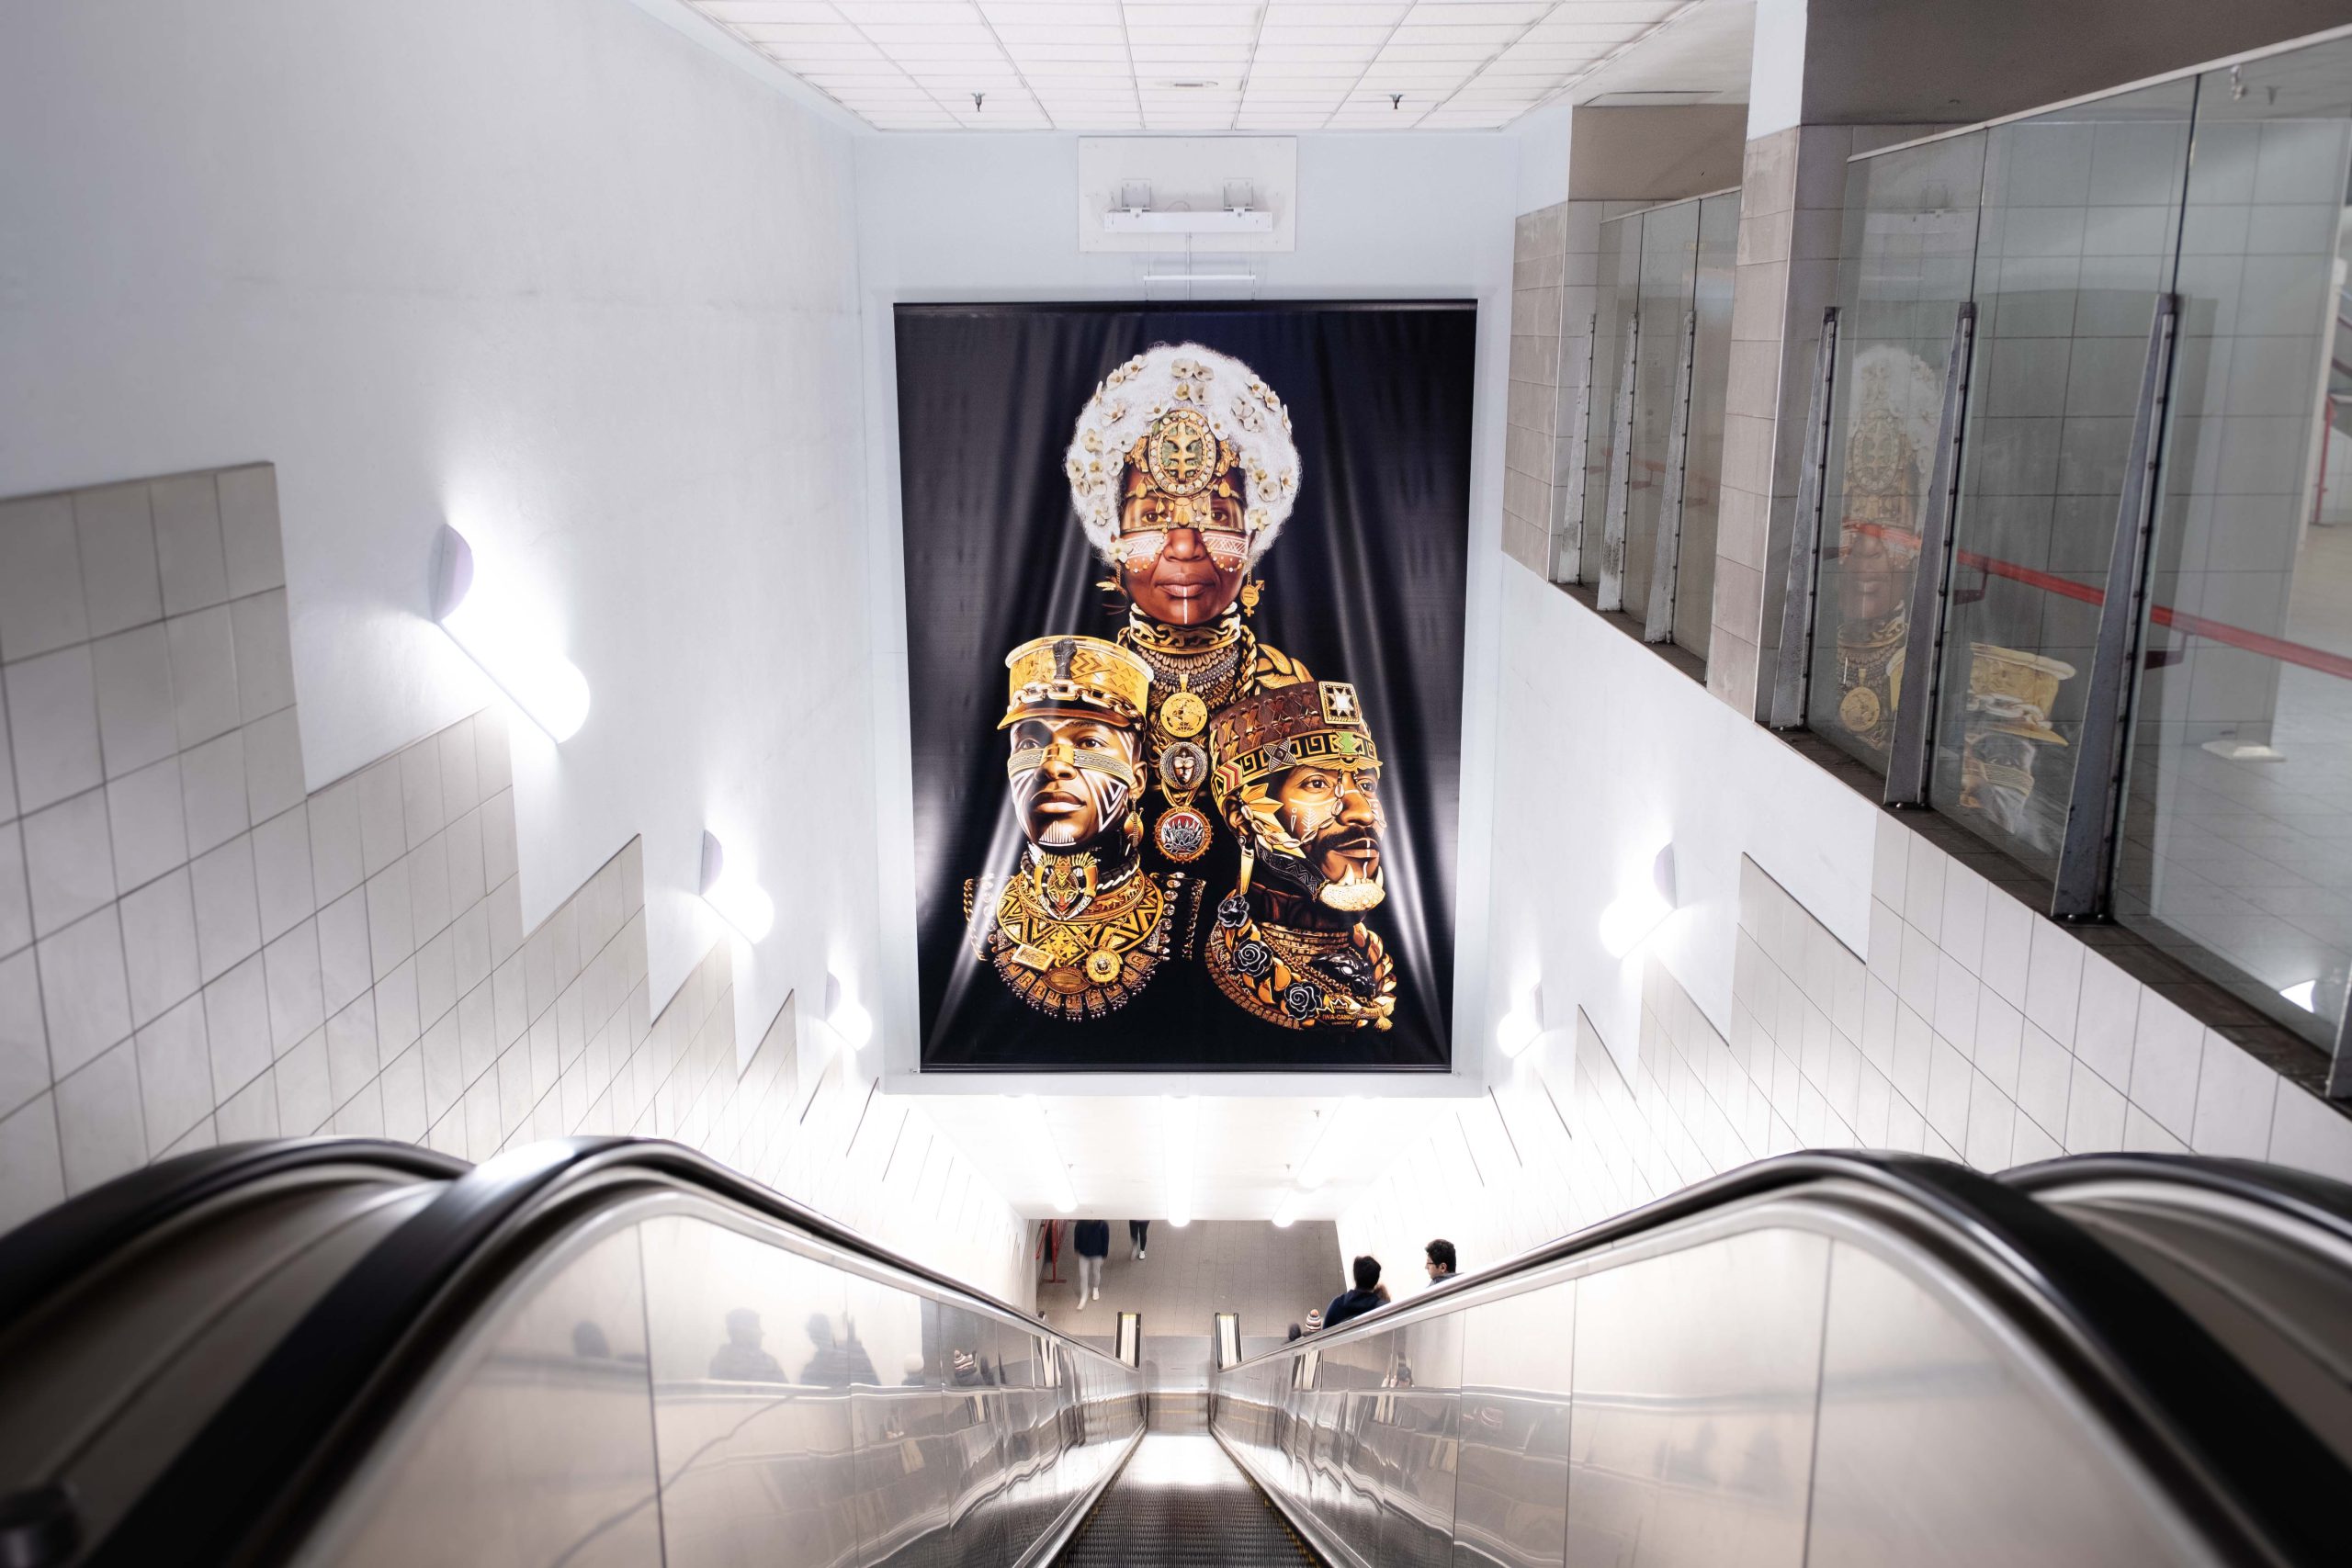 Artwork 'Look For Us In The Whirlwind' by Adeyemi Adegbesan above the escalators at Granville Station, Dunsmuir exit